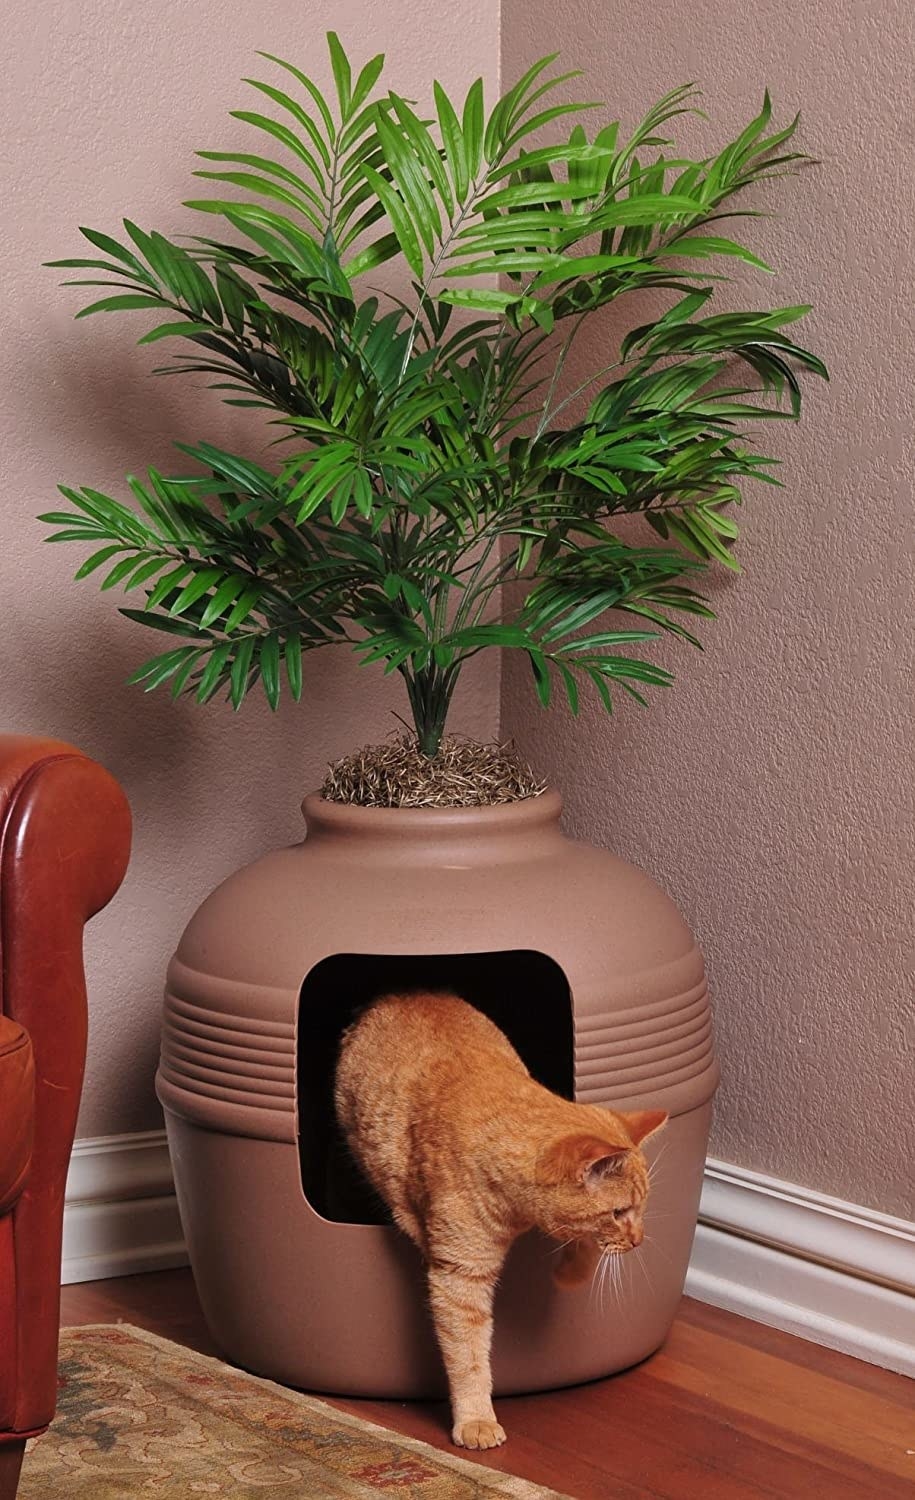 A cat exiting the litter box that looks like a planter